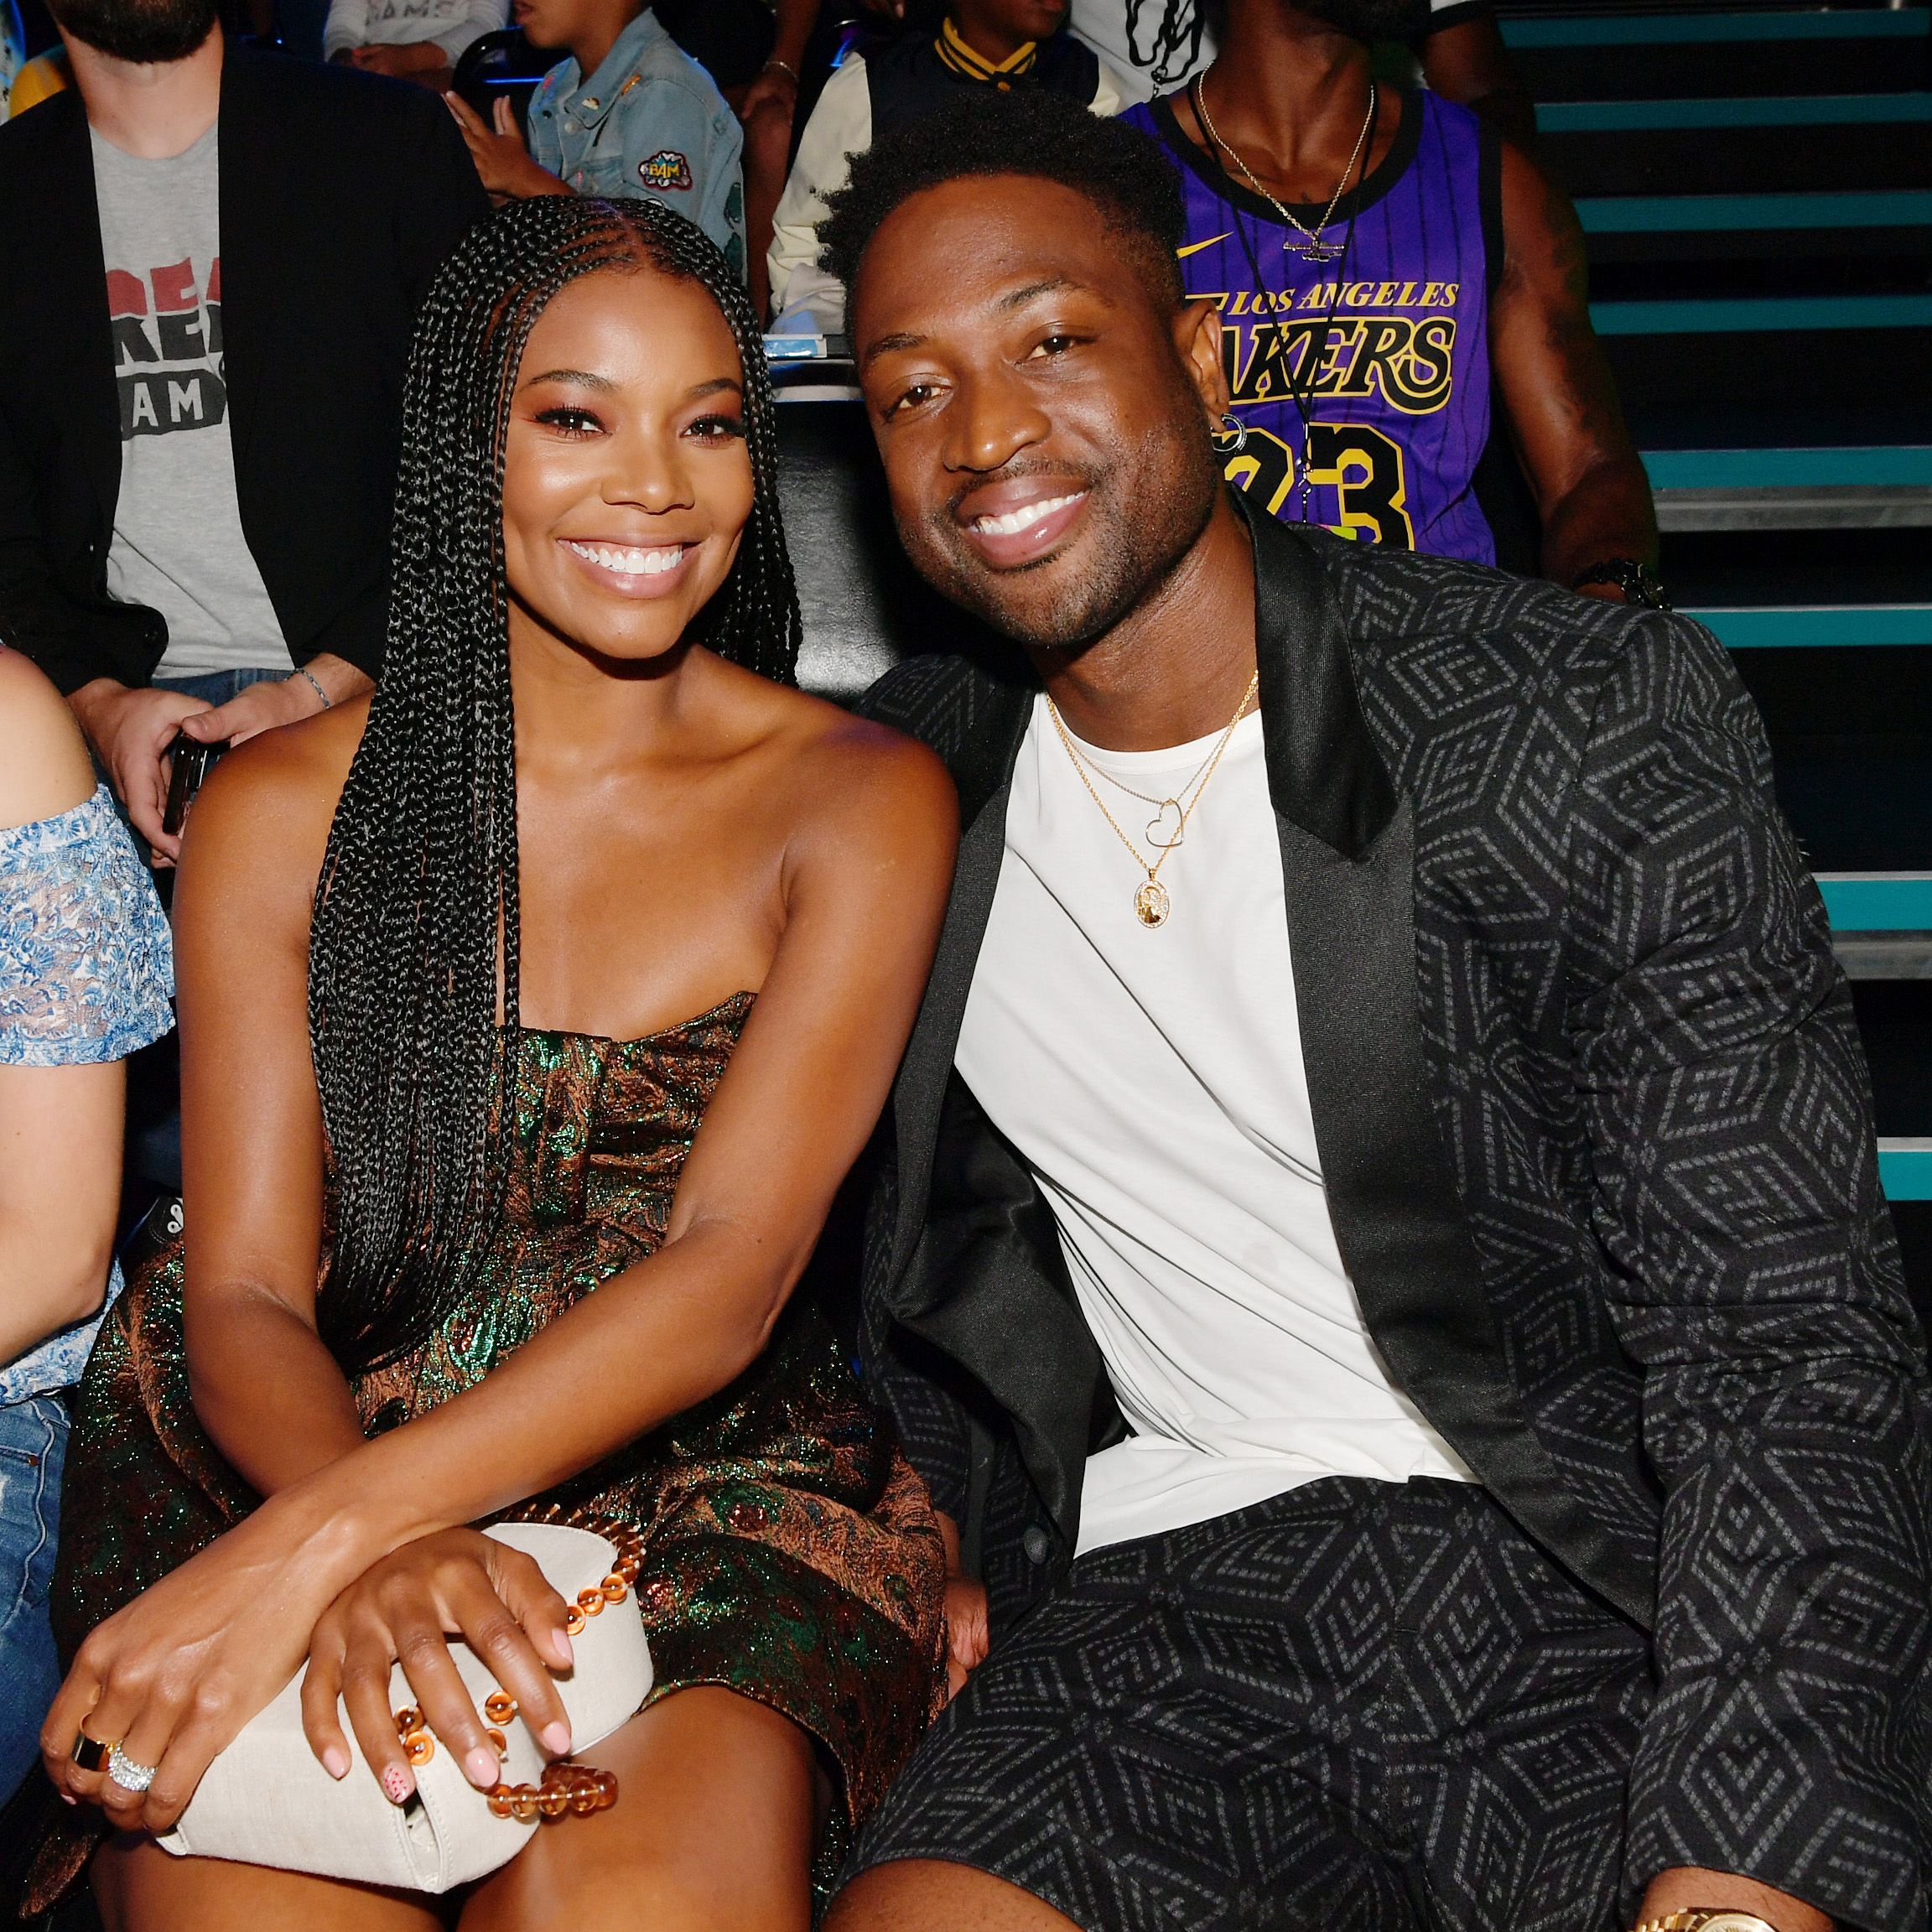 Gabrielle Union and Dwyane Wade attending a Nickelodeon event on July 11, 2019 in California | Photo: Getty Images